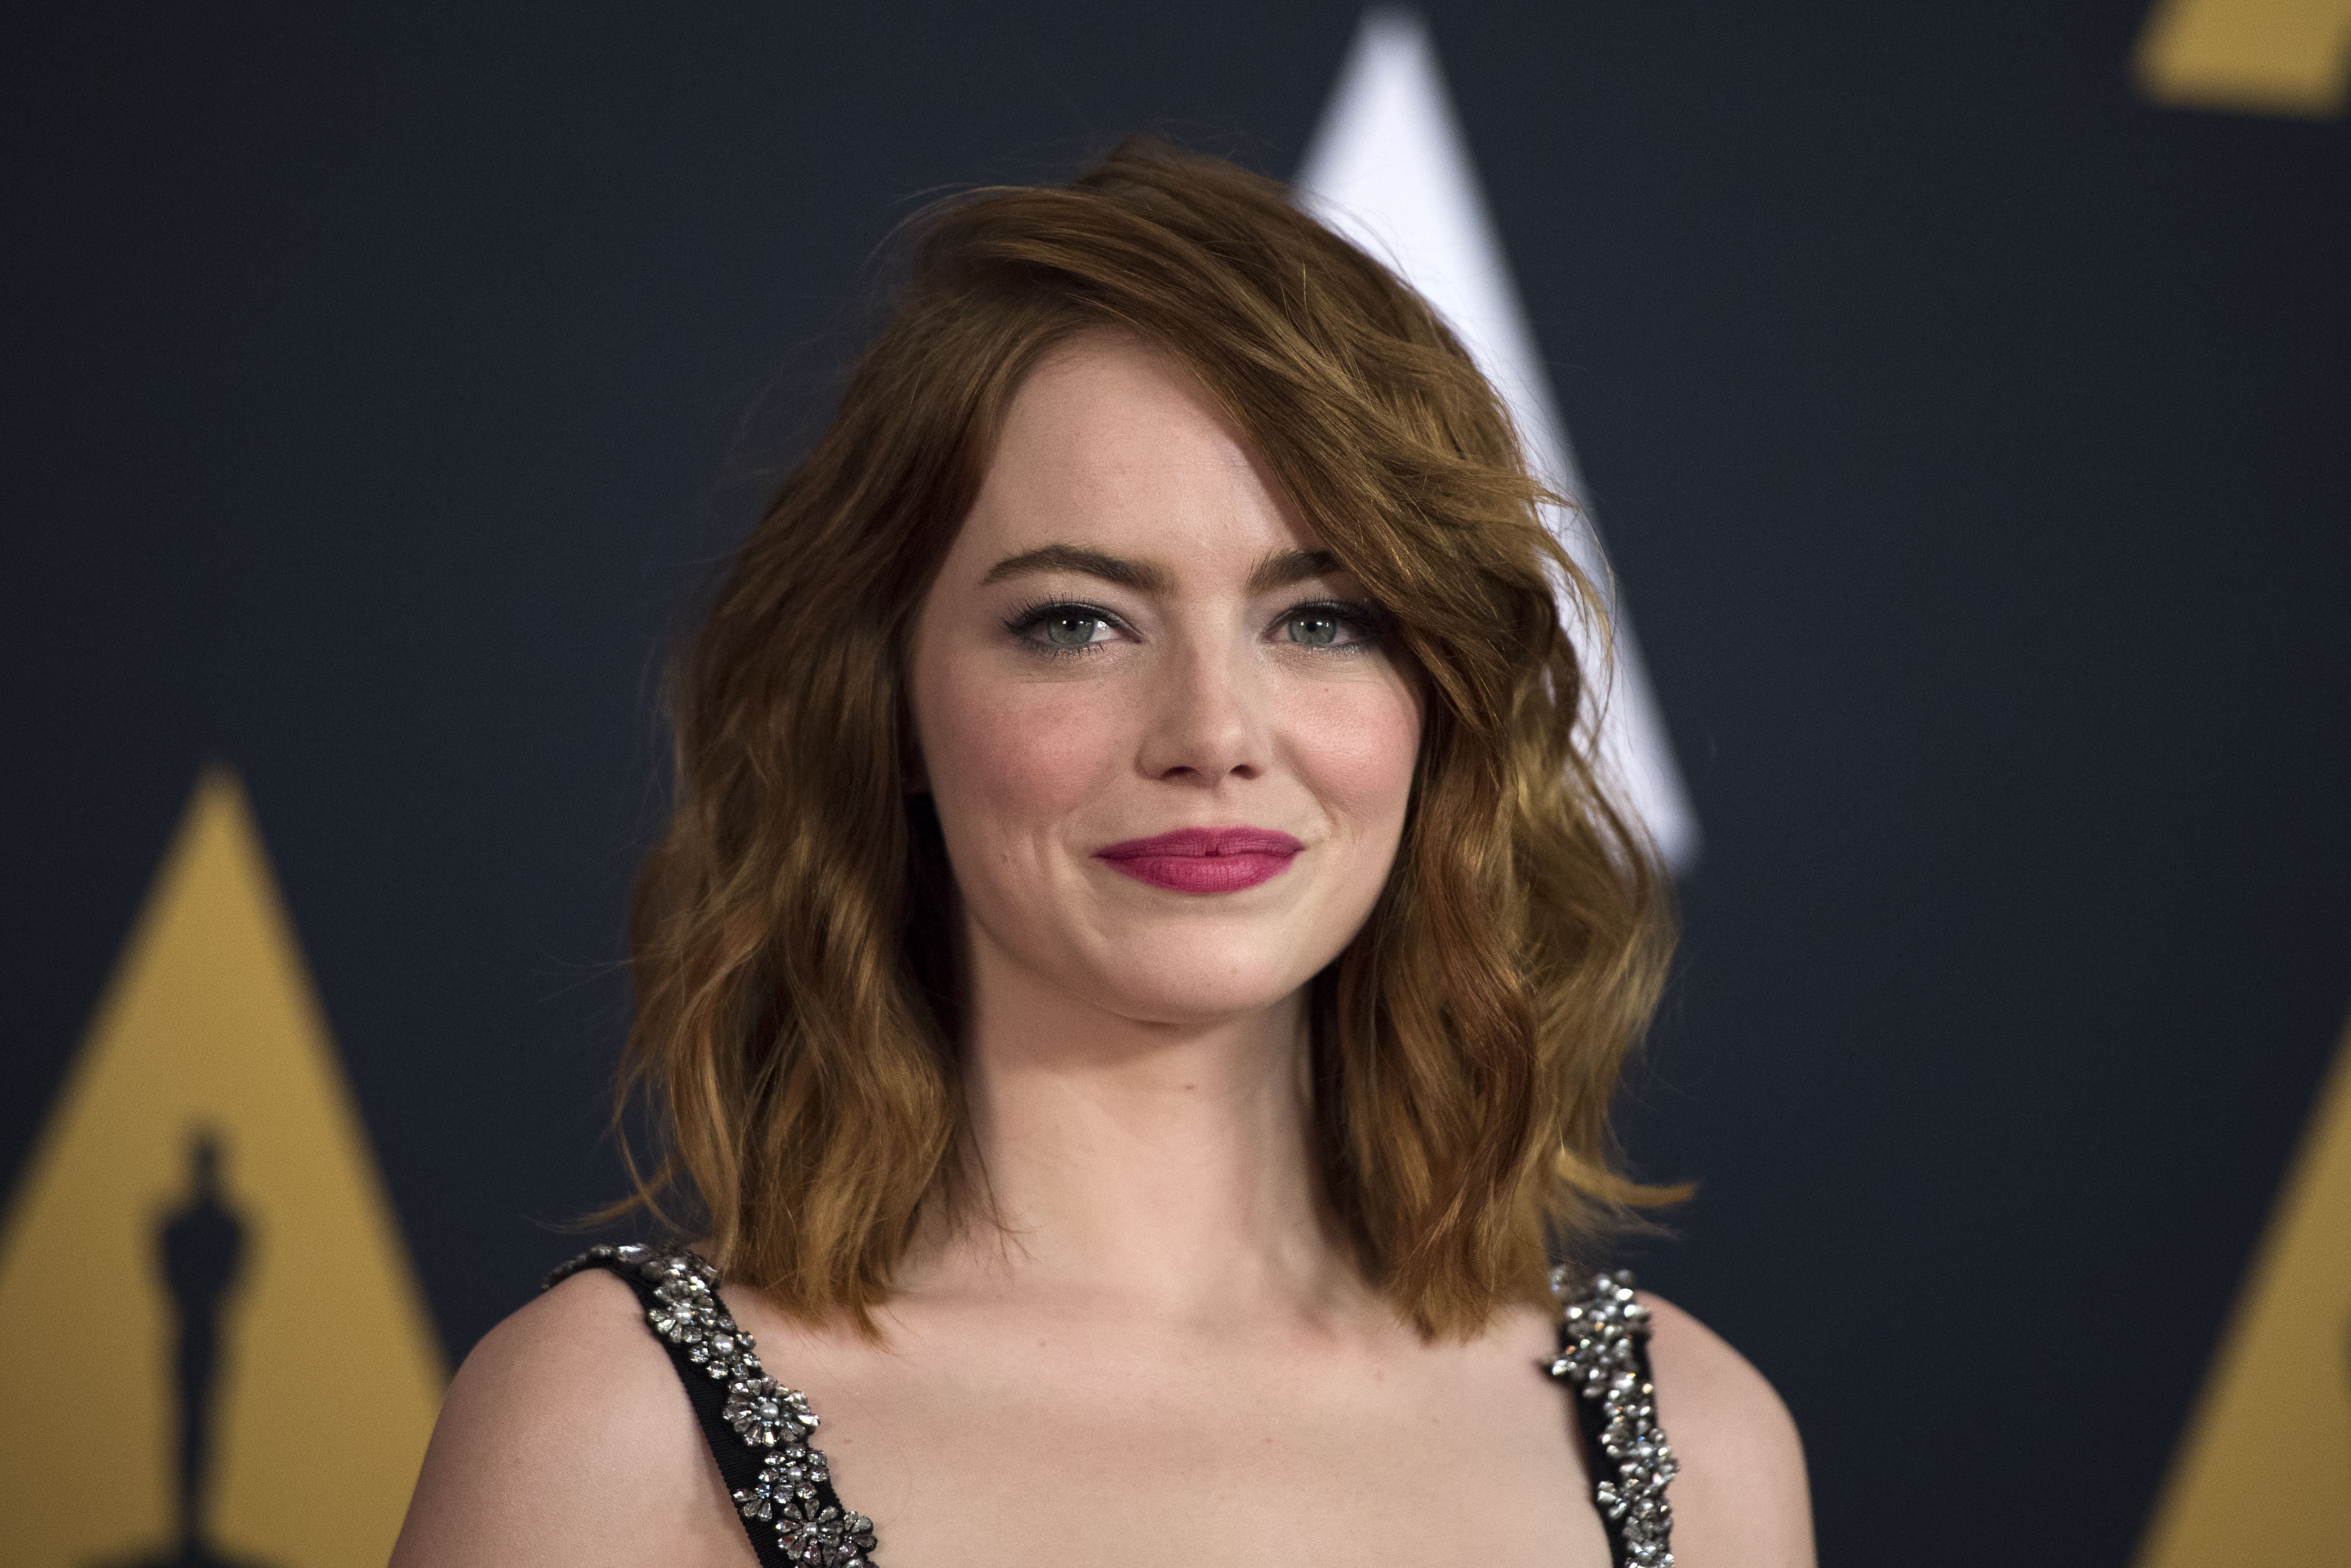 Actress Emma Stone attends the 8th Annual Governors Awards hosted by the Academy of Motion Picture Arts and Sciences on November 12, 2016, at the Hollywood & Highland Center in Hollywood, California. (Valerie Macon—Getty Images)